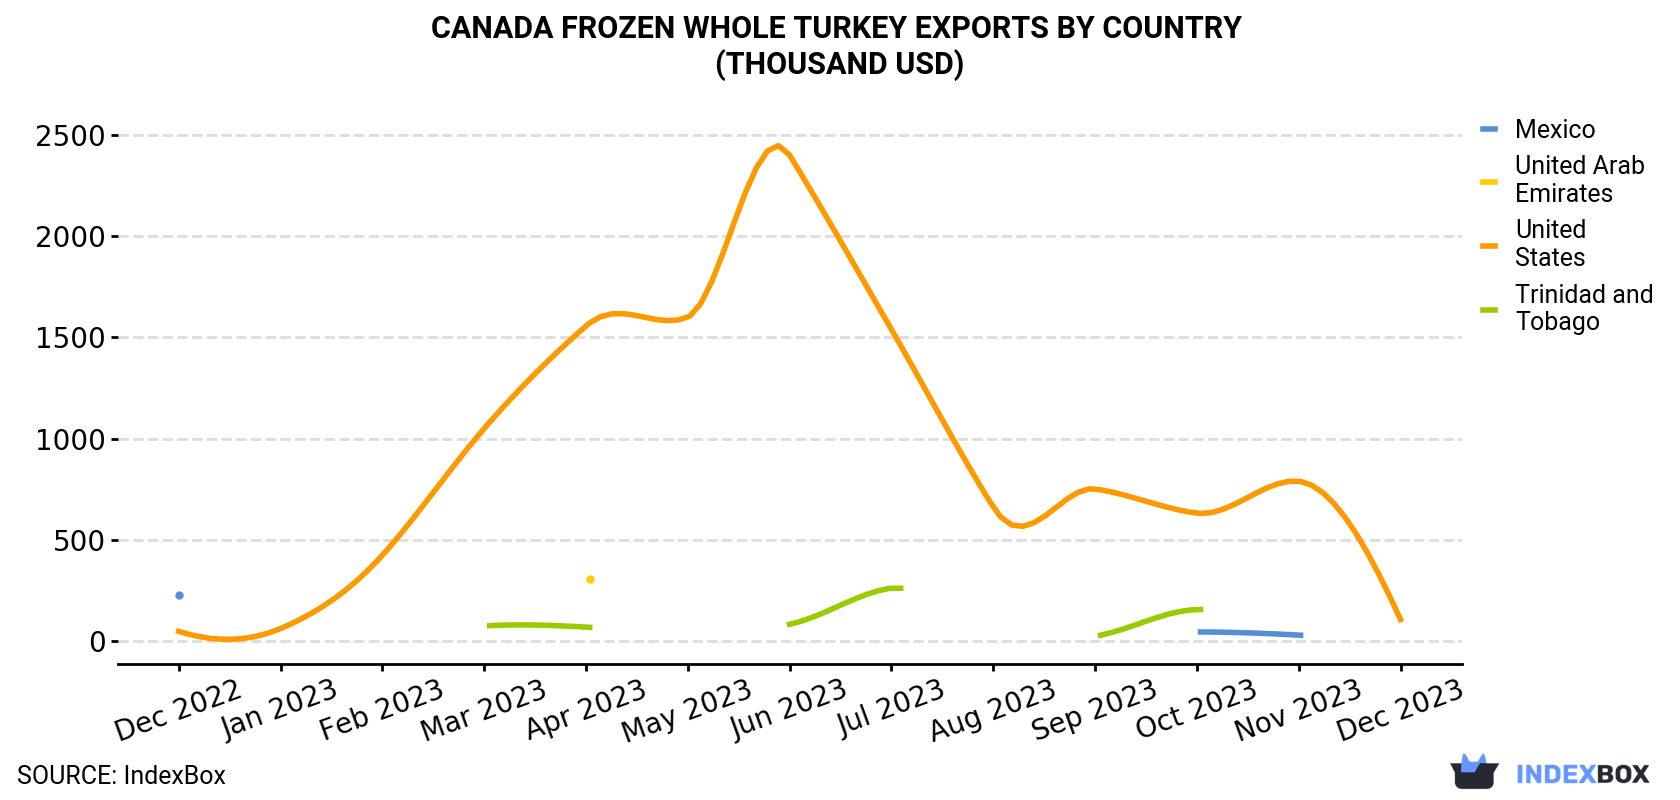 Canada Frozen Whole Turkey Exports By Country (Thousand USD)